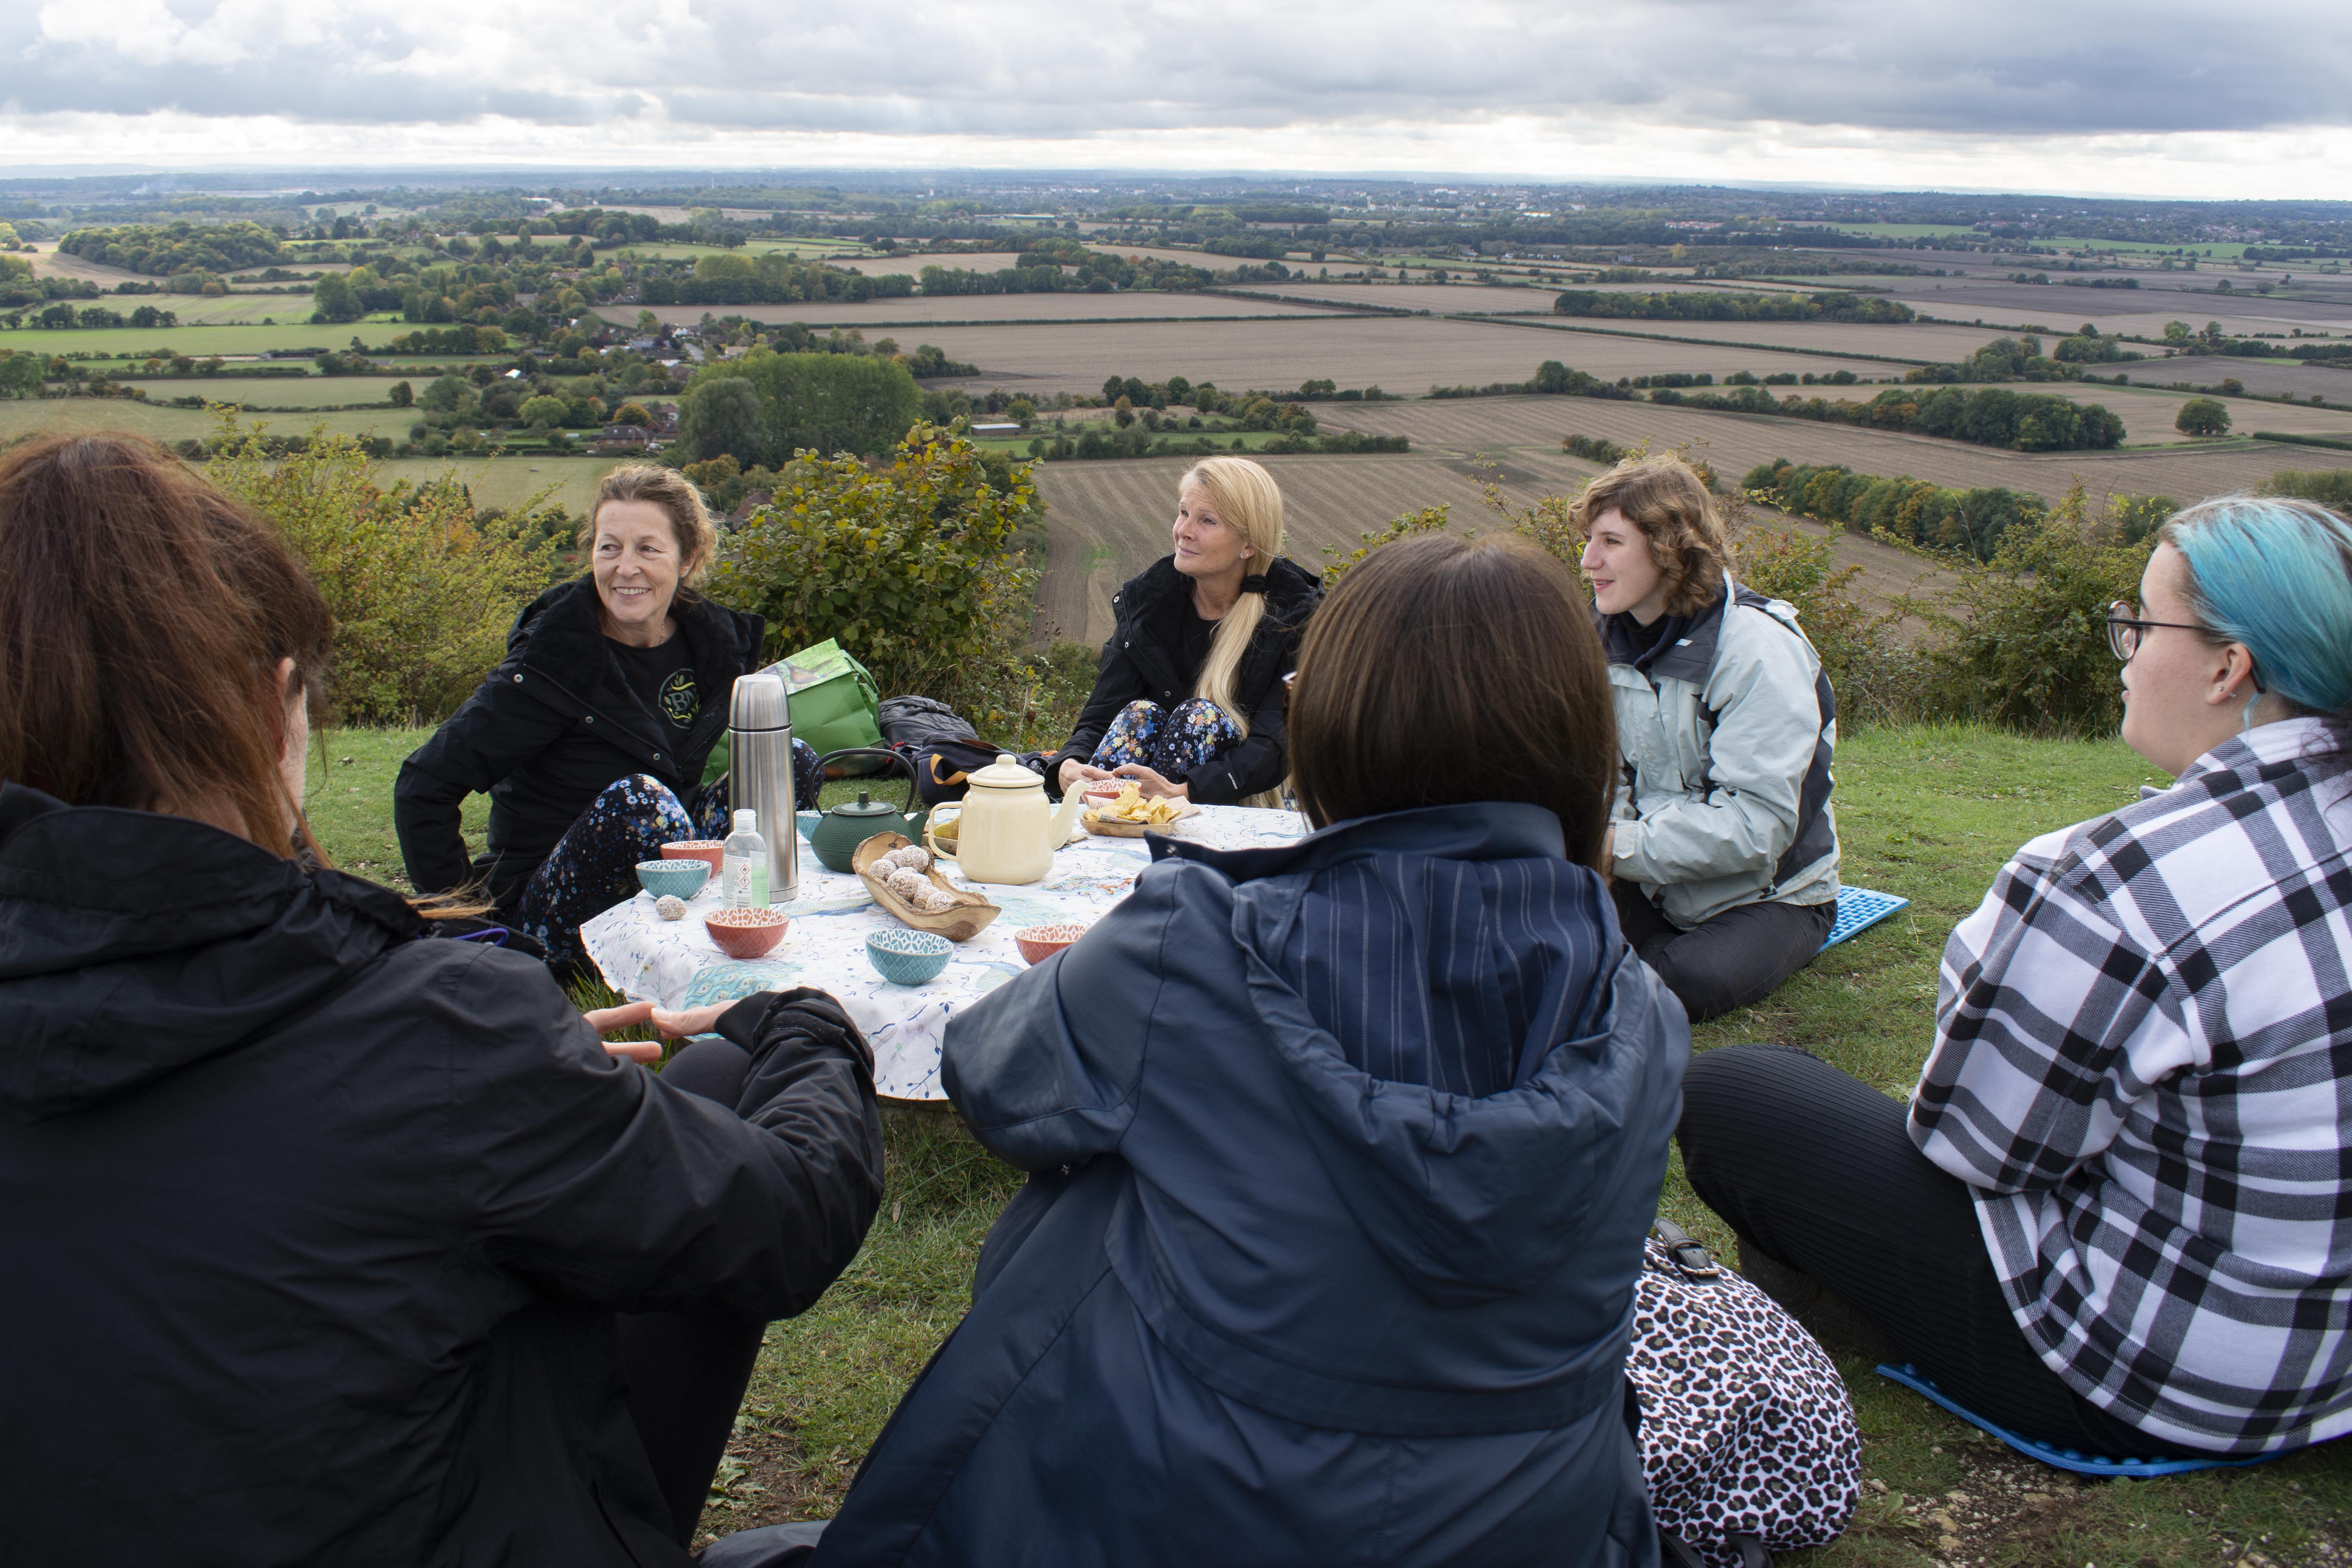 People sat around a treestump with a table cloth, a kettle and other amenities on it. Rolling fields and the sea can be seen in the background.